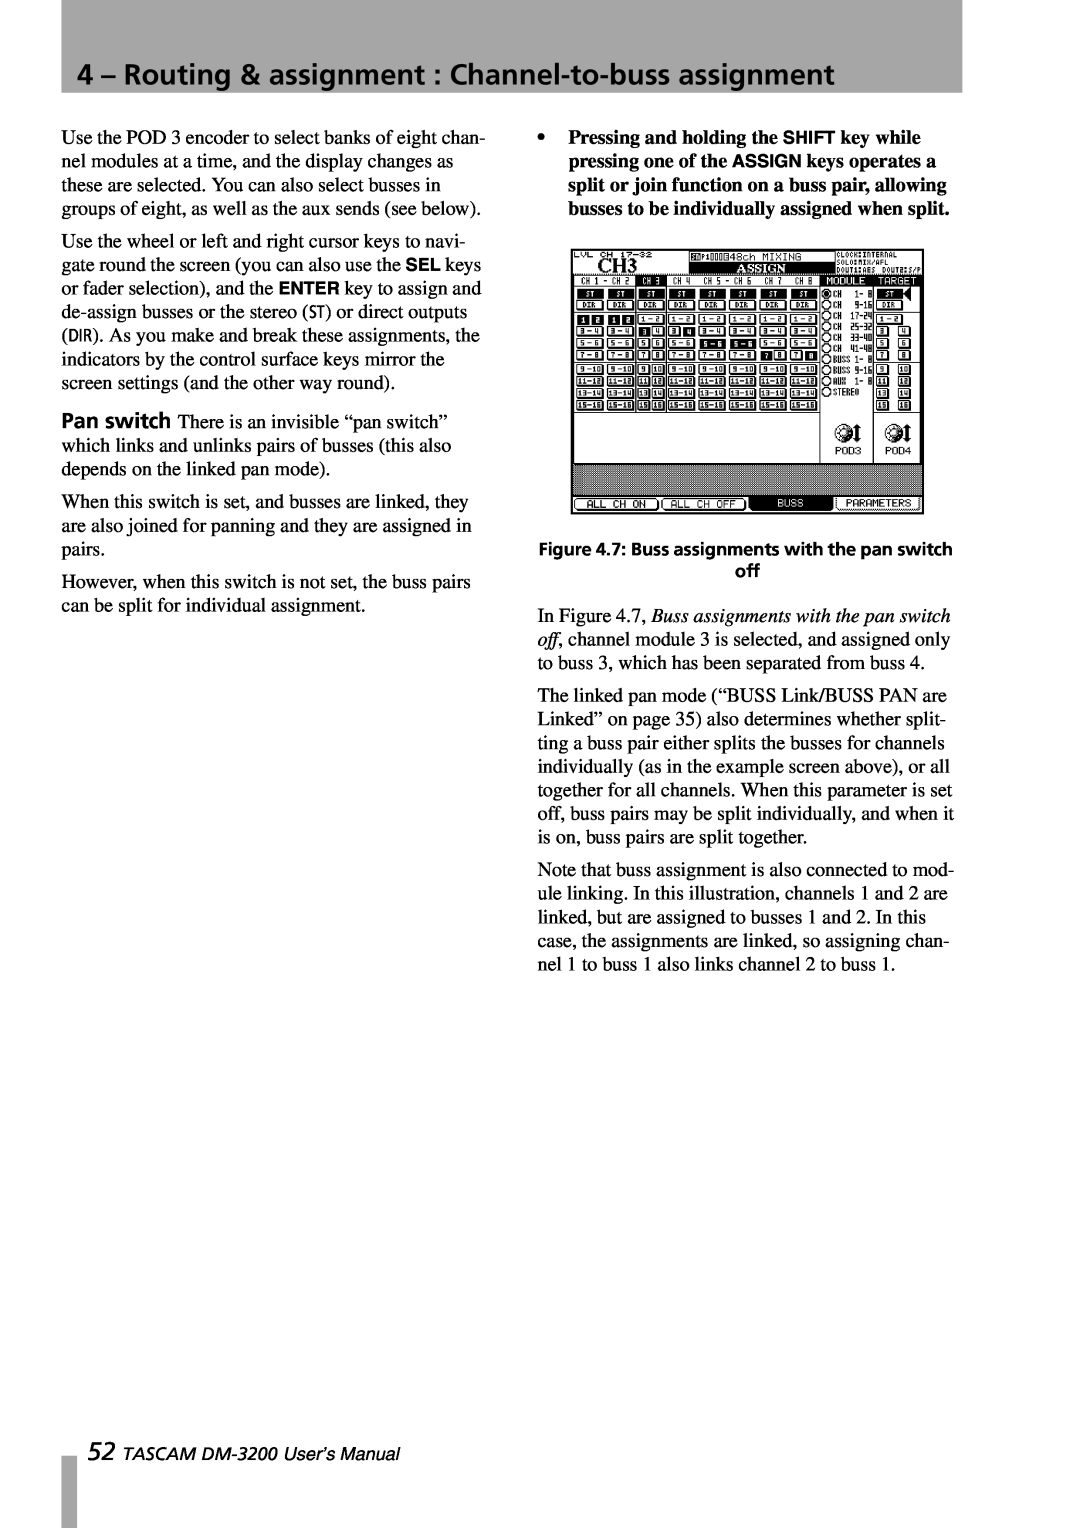 Tascam owner manual 7: Buss assignments with the pan switch, TASCAM DM-3200User’s Manual 